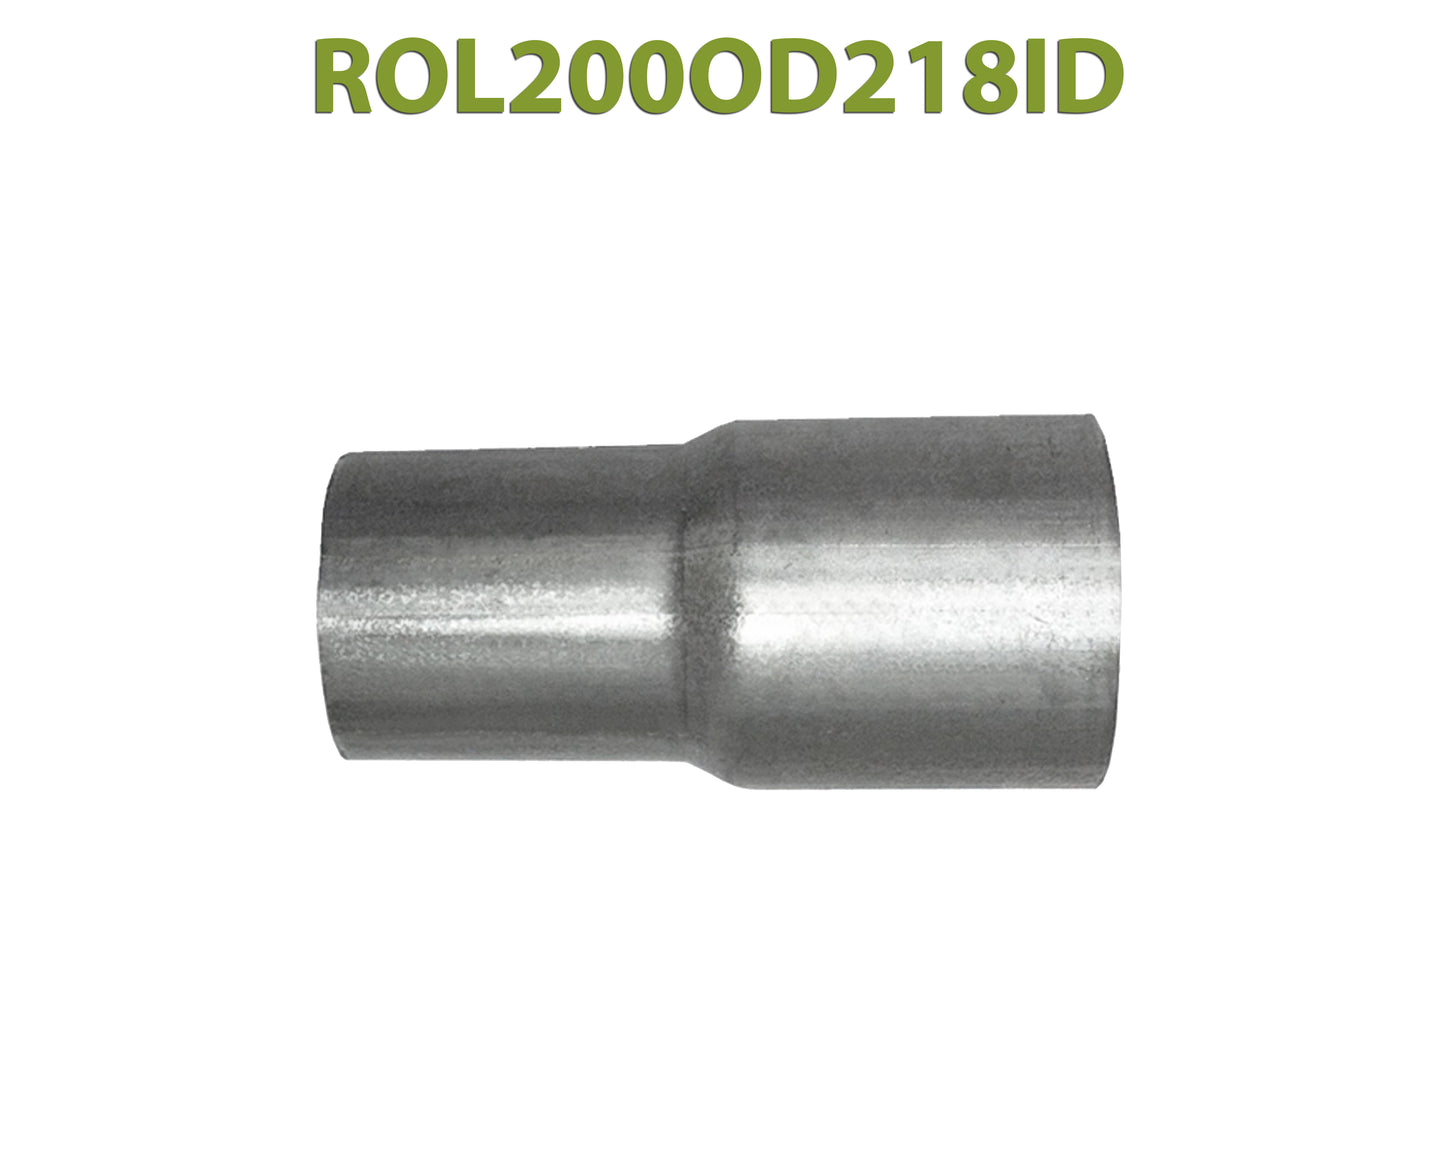 ROL200OD218ID 548514 2” OD to 2 1/8” ID Universal Exhaust Component to Pipe Adapter Reducer